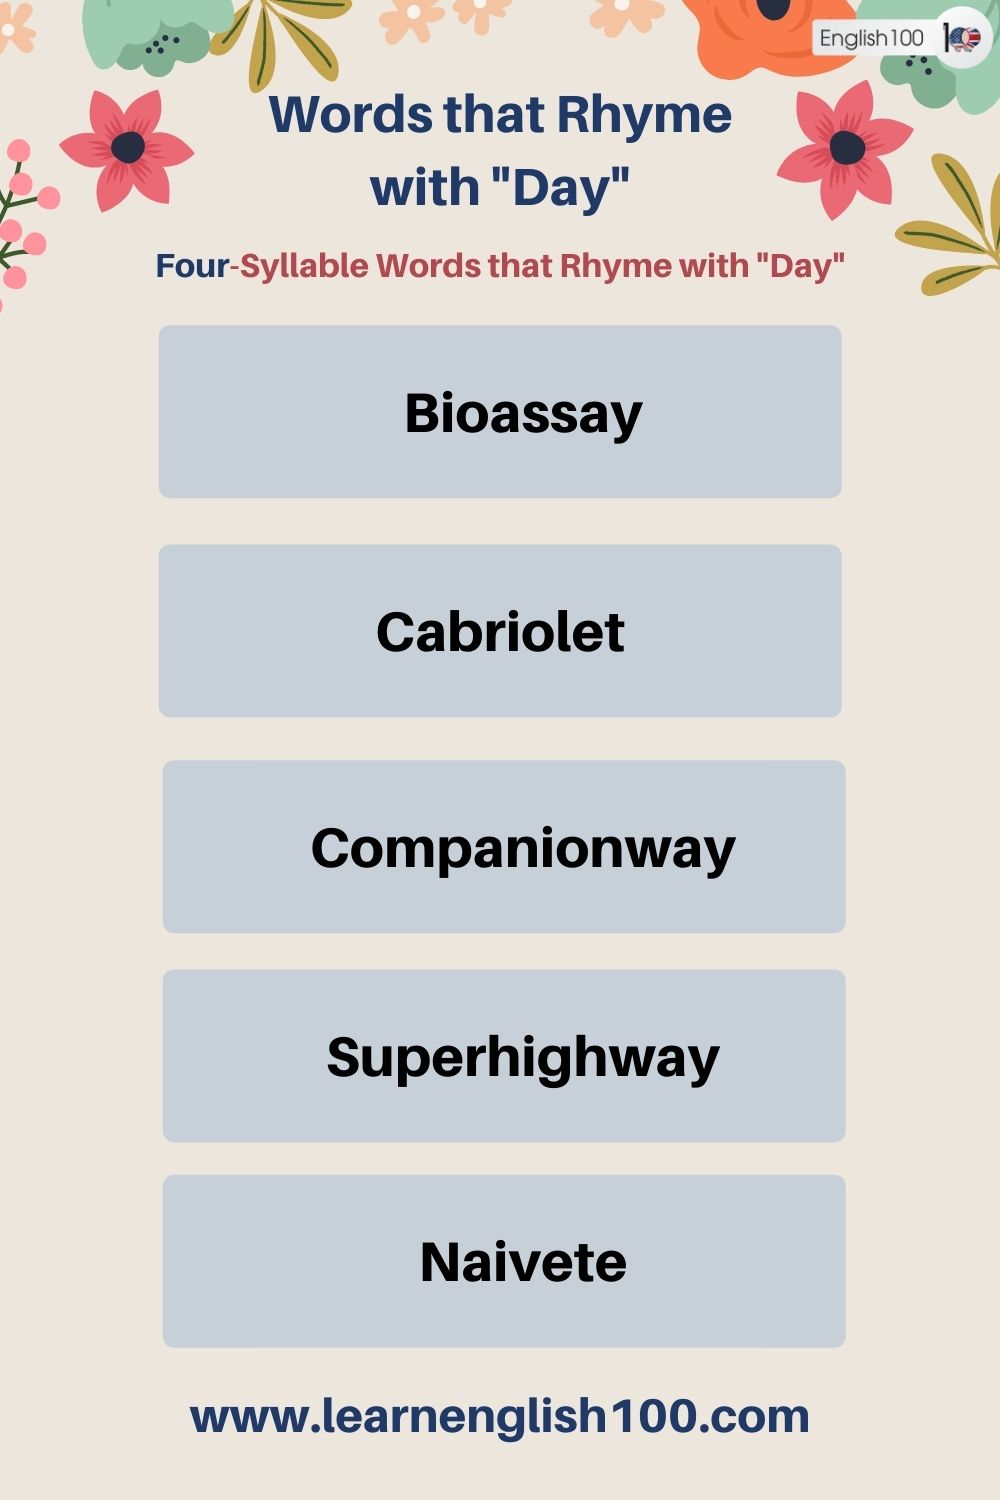  Words that Rhyme with "Love" / "Day"